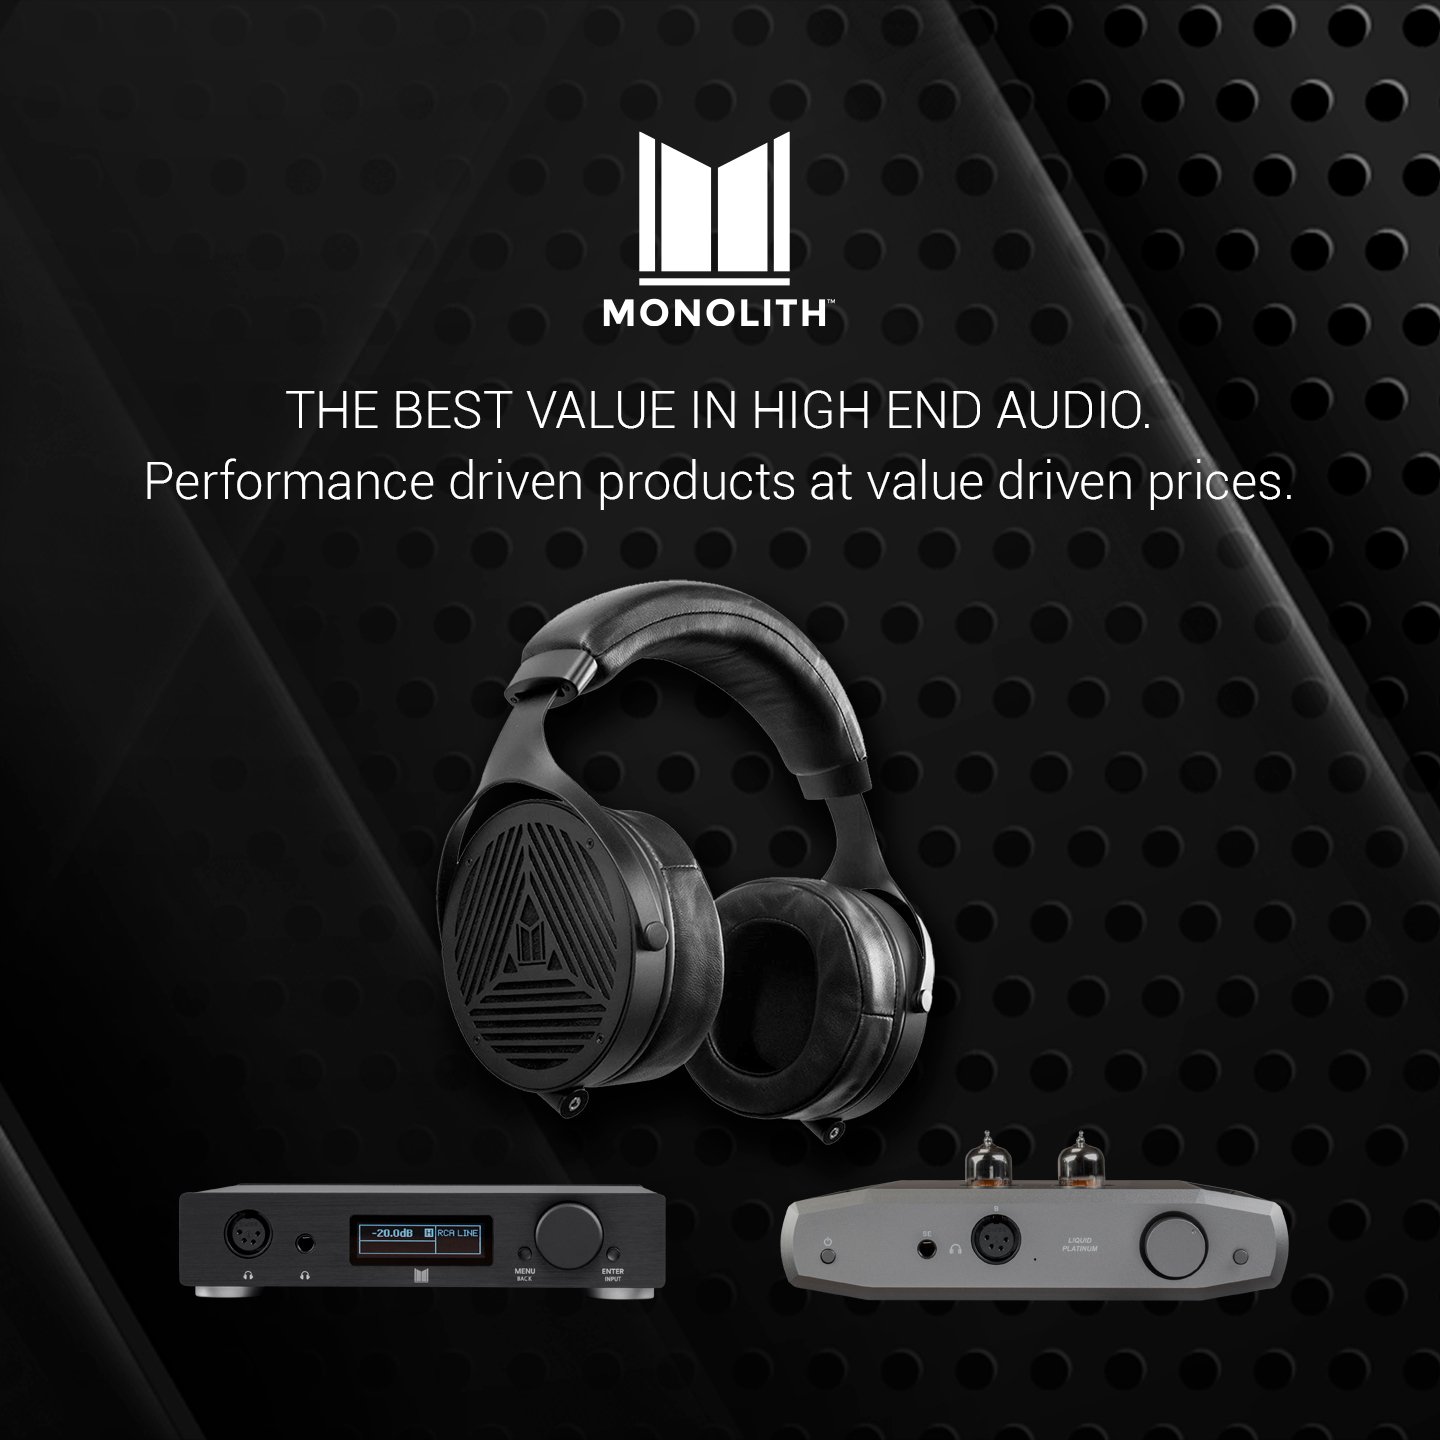 Monolith by Monoprice - The best value in high end audio. Performance driven products at value driven prices.